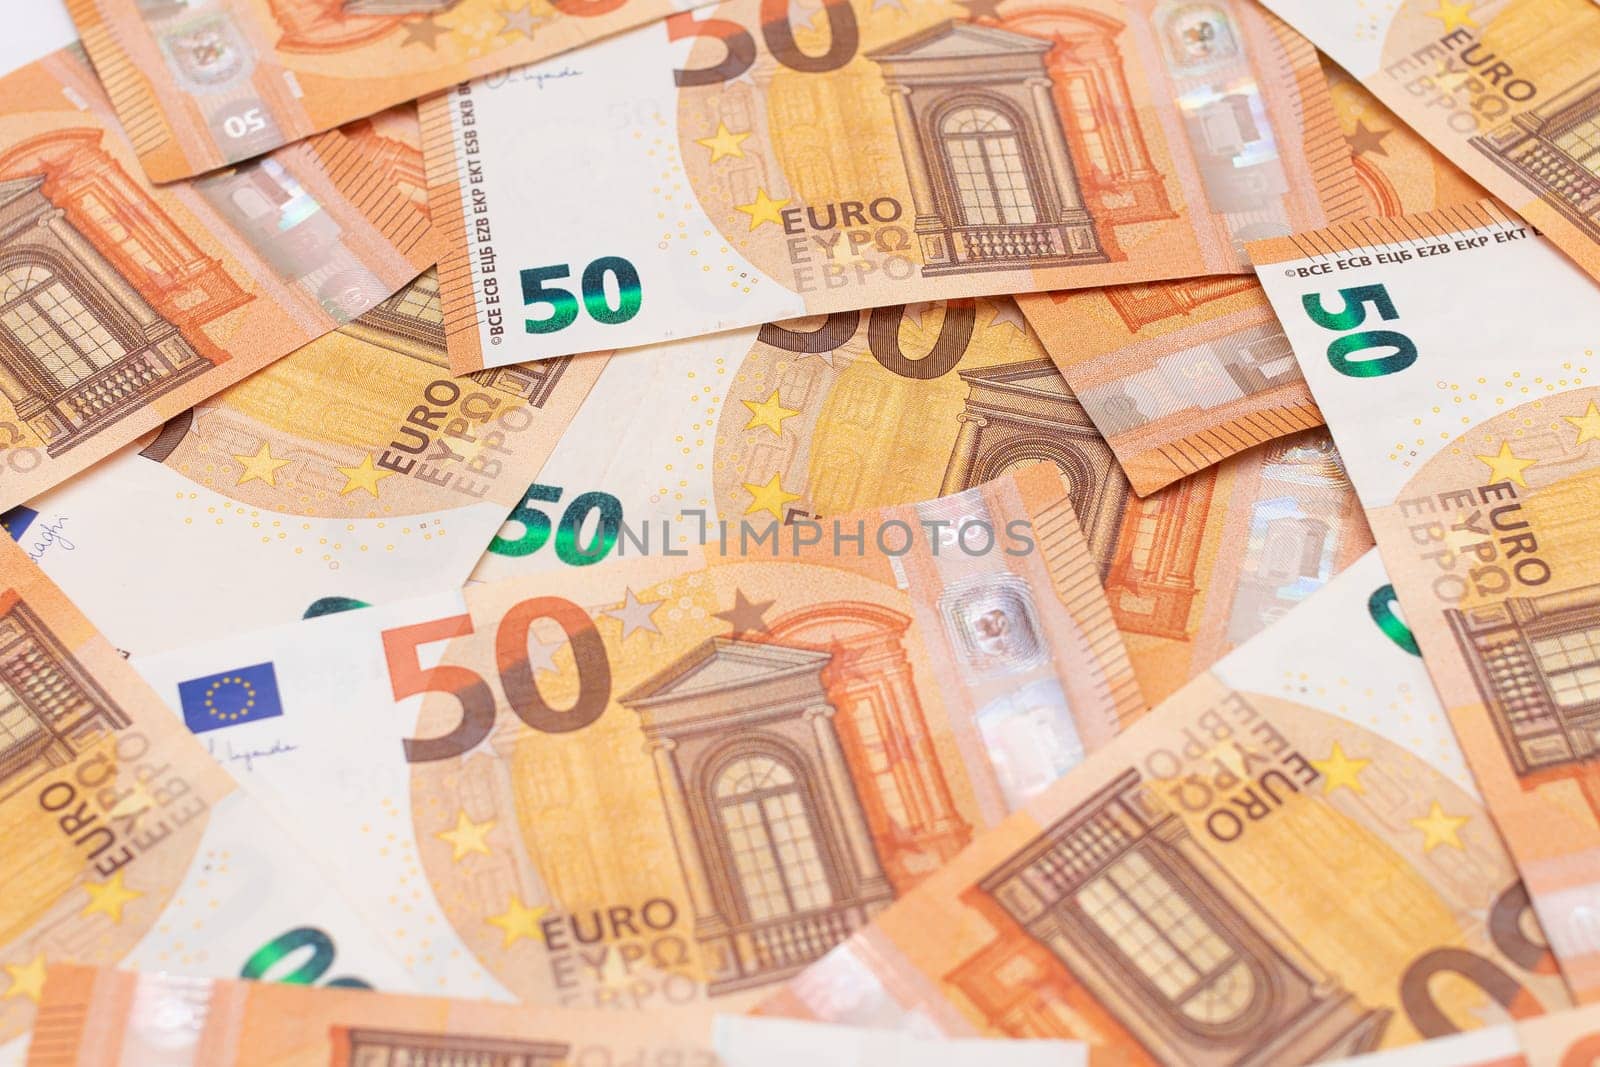 50 Euro Banknotes Money Background. Euro Money Currency. Orange Paper Money. A Lot of Fifty Euro Bills. Business, Finances, Cash and Money Saving Concept